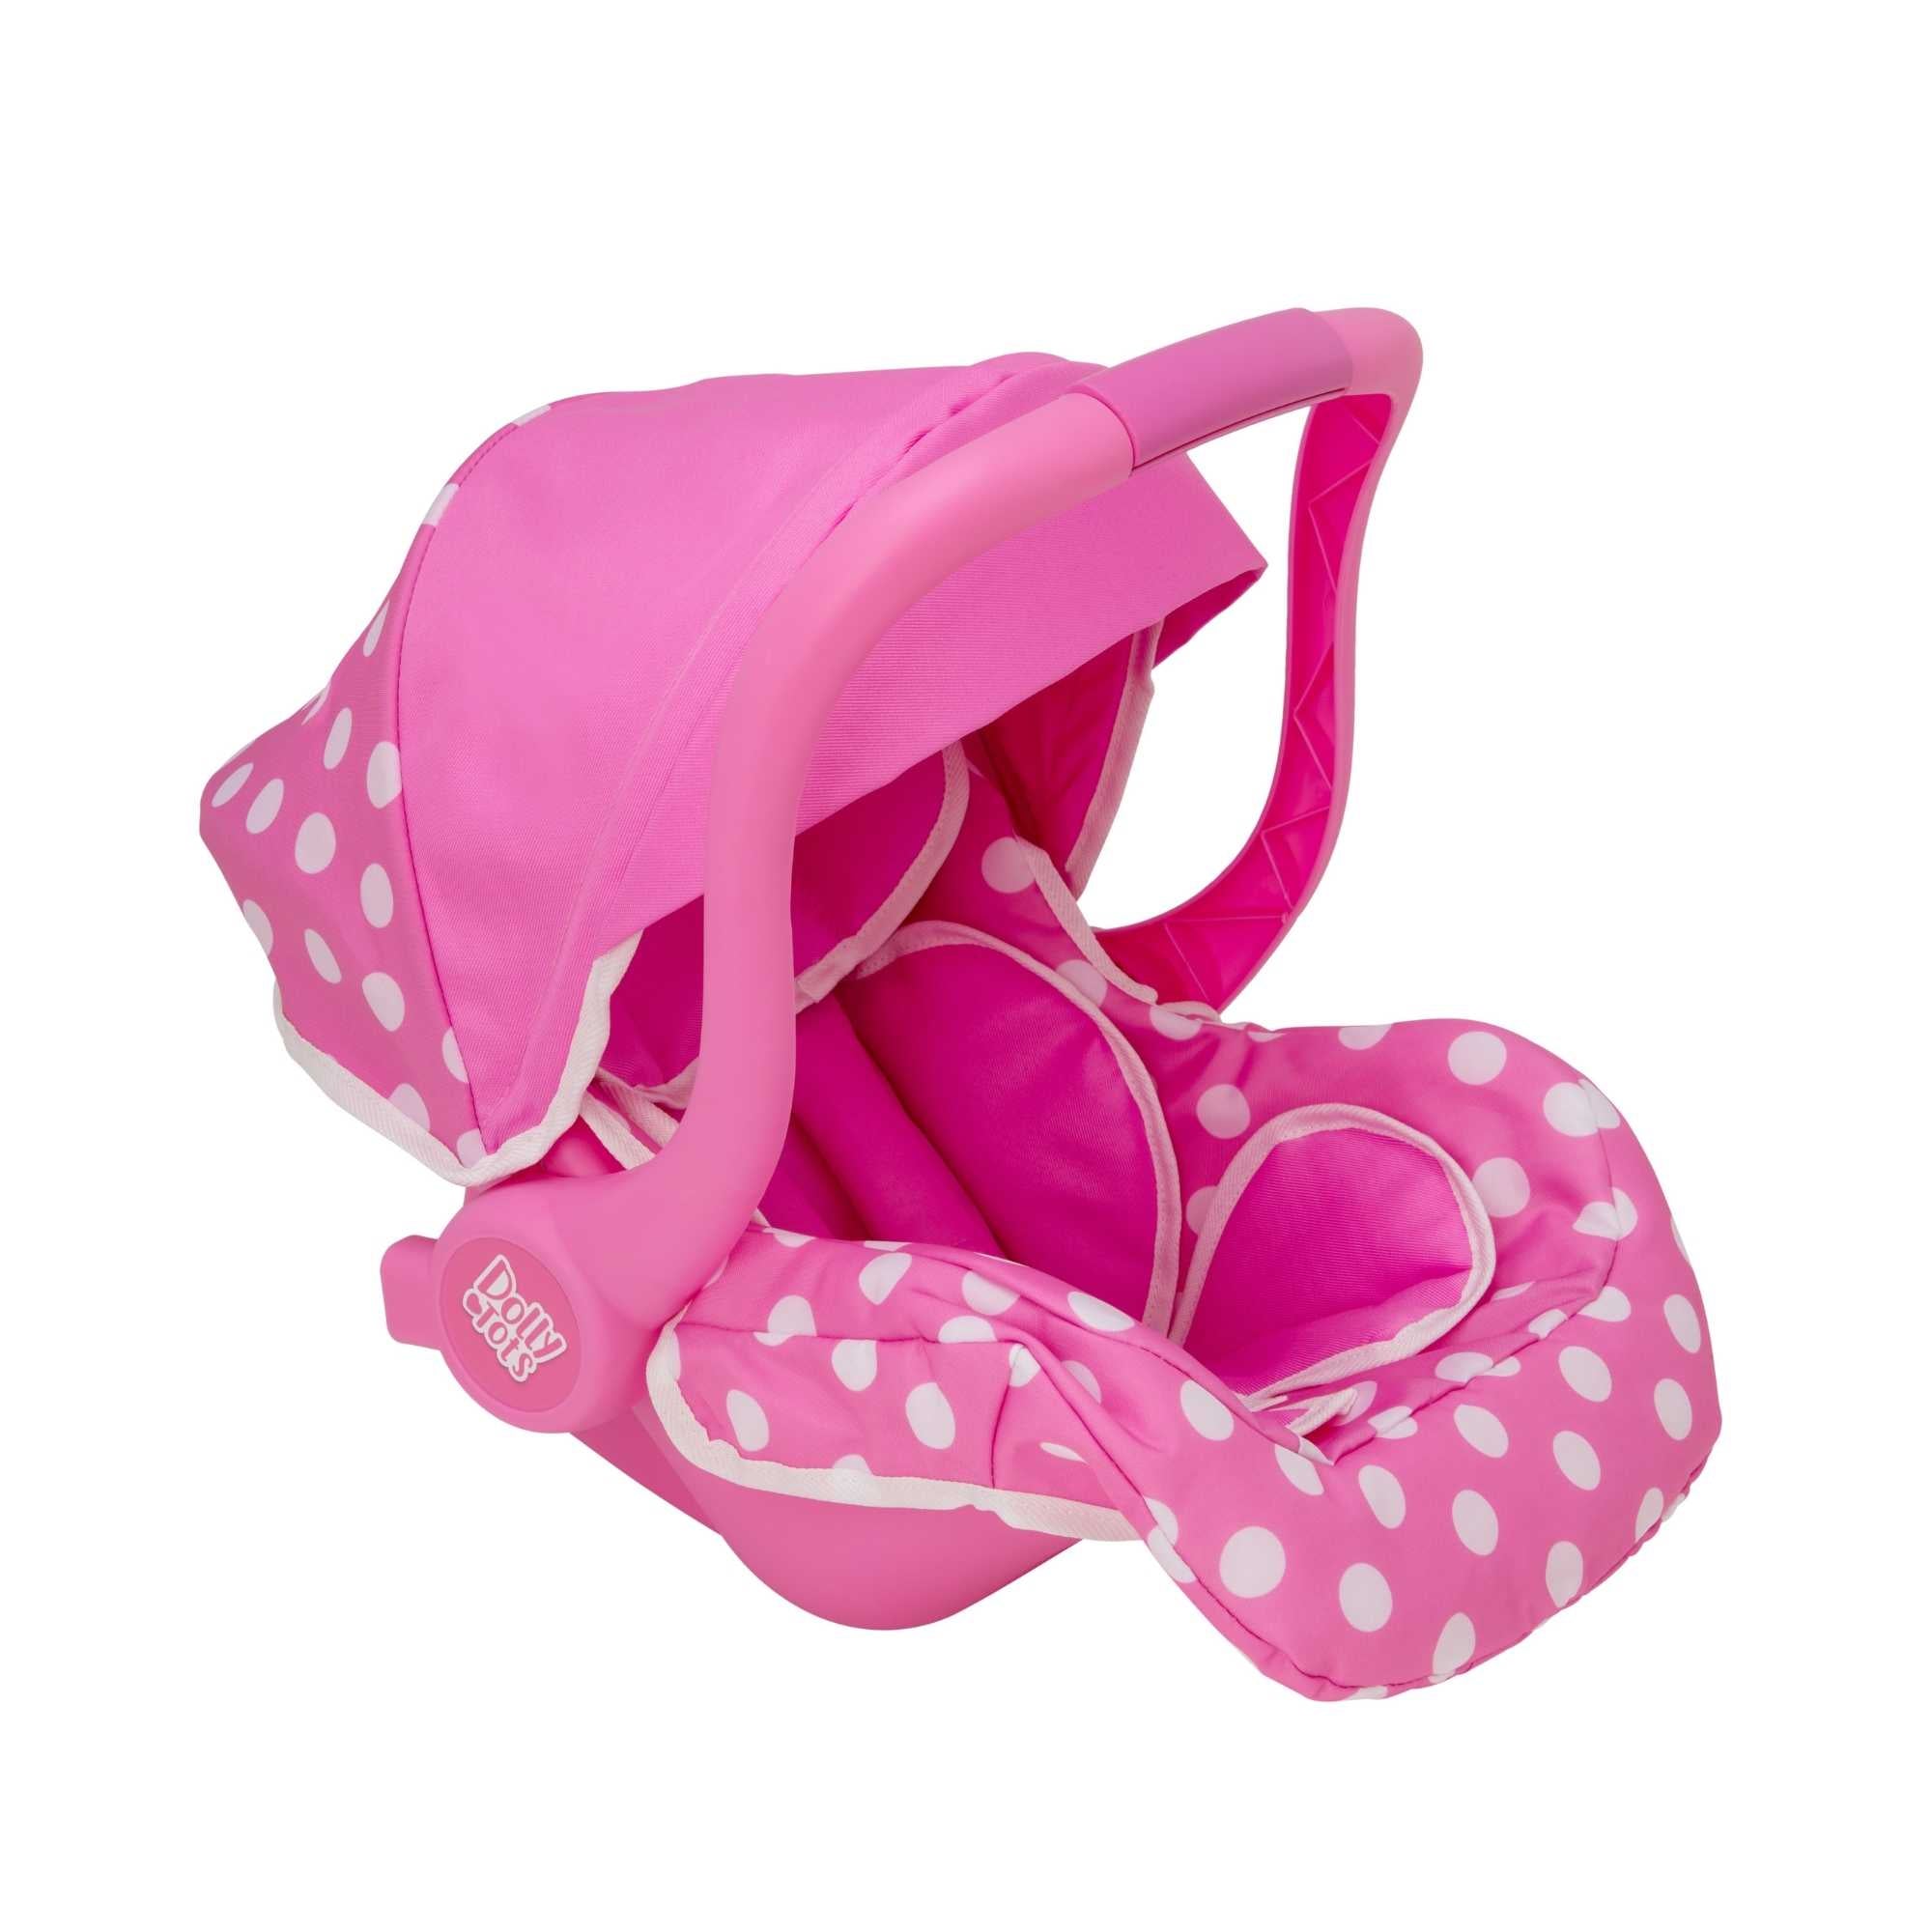 Dolly Tots Dolls Car Seat from Wowow Toys